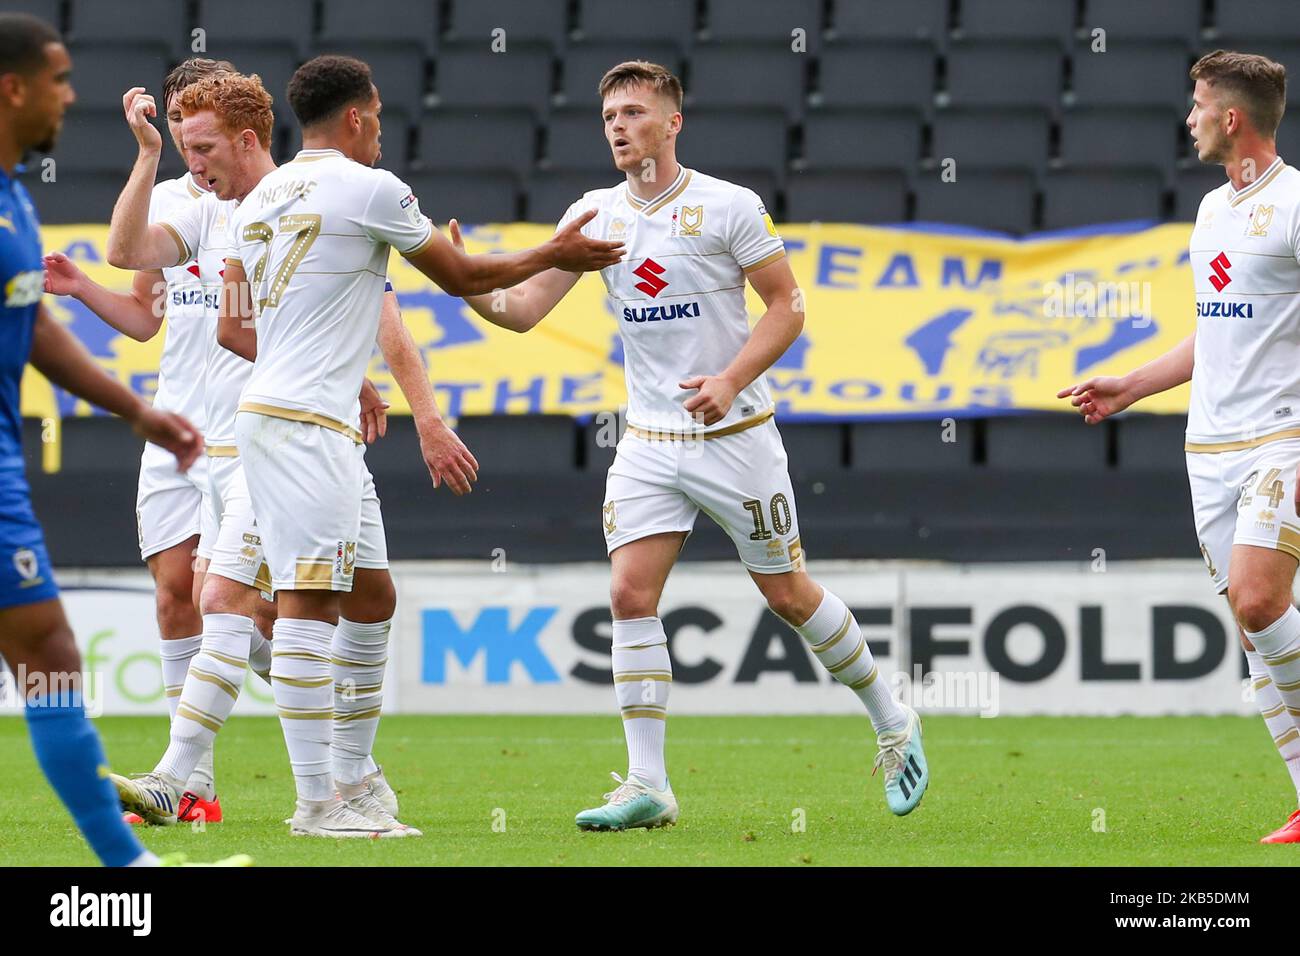 Rhys Healey celebrates after scoring for MK Dons, to extend their lead making it 2 - 0 against AFC Wimbledon, during the Sky Bet League 1 match between MK Dons and AFC Wimbledon at Stadium MK, Milton Keynes on Saturday 7th September 2019. (Photo by John Cripps/ MI News/NurPhoto) Stock Photo